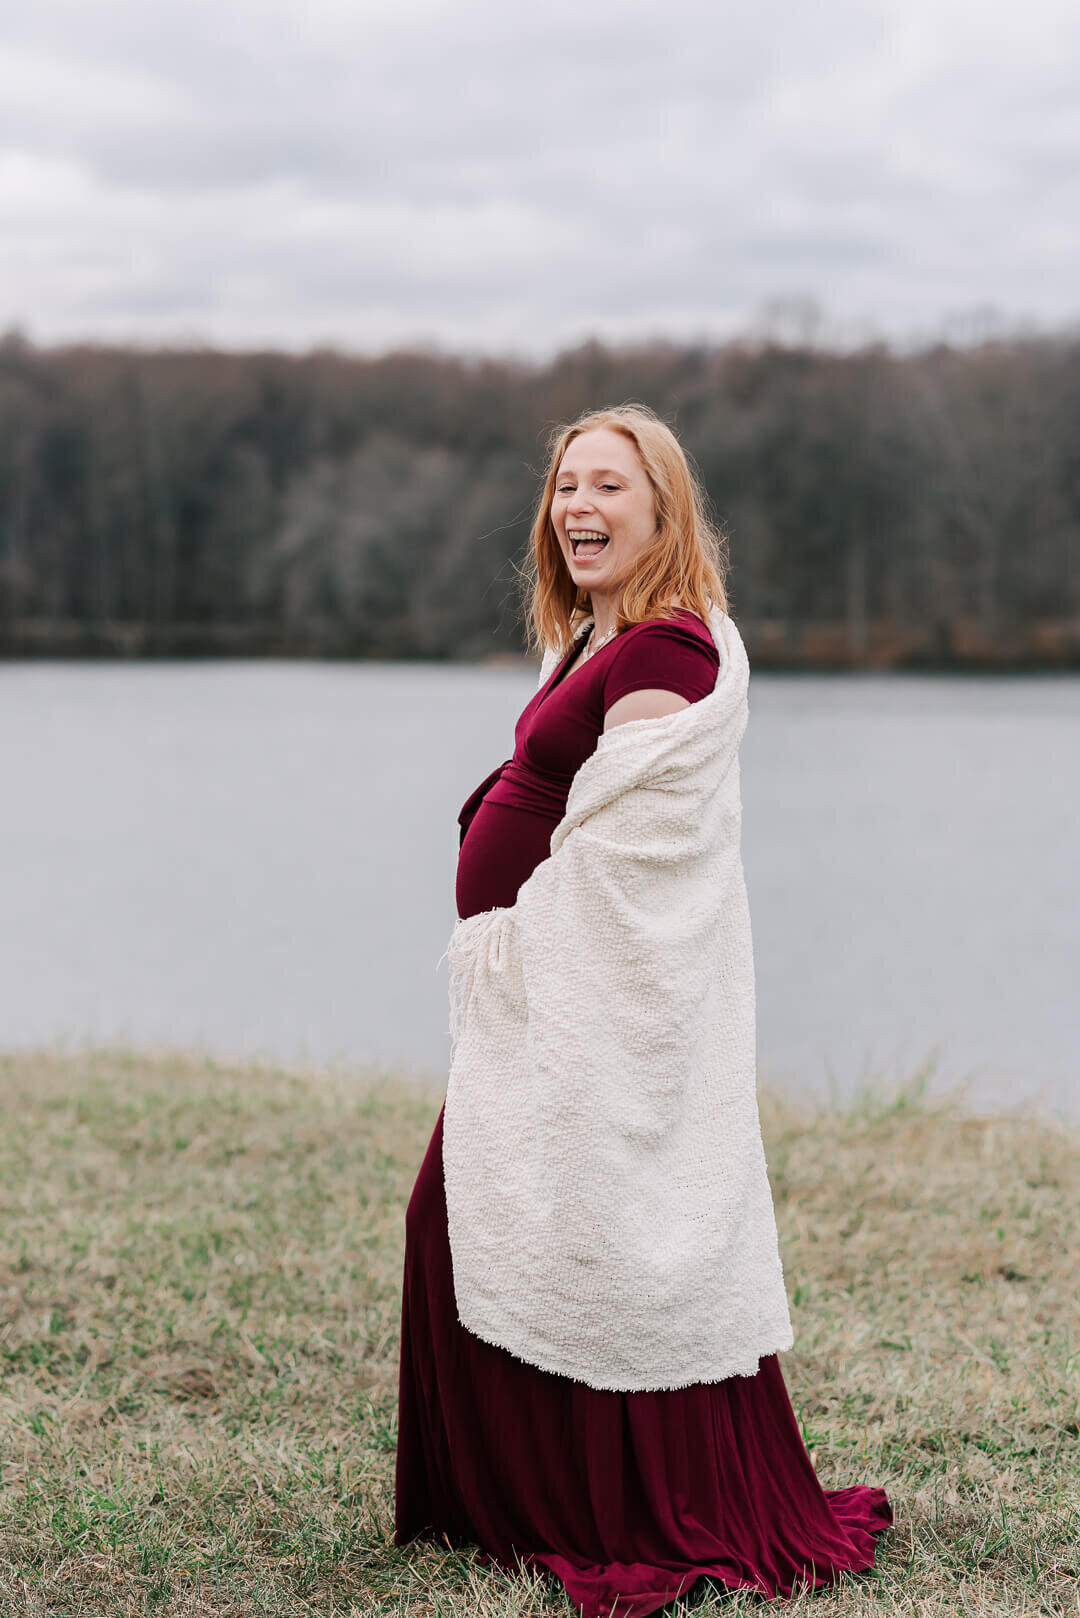 A red-headed pregnant woman holding a warm blanket joyfully laughing during her maternity session